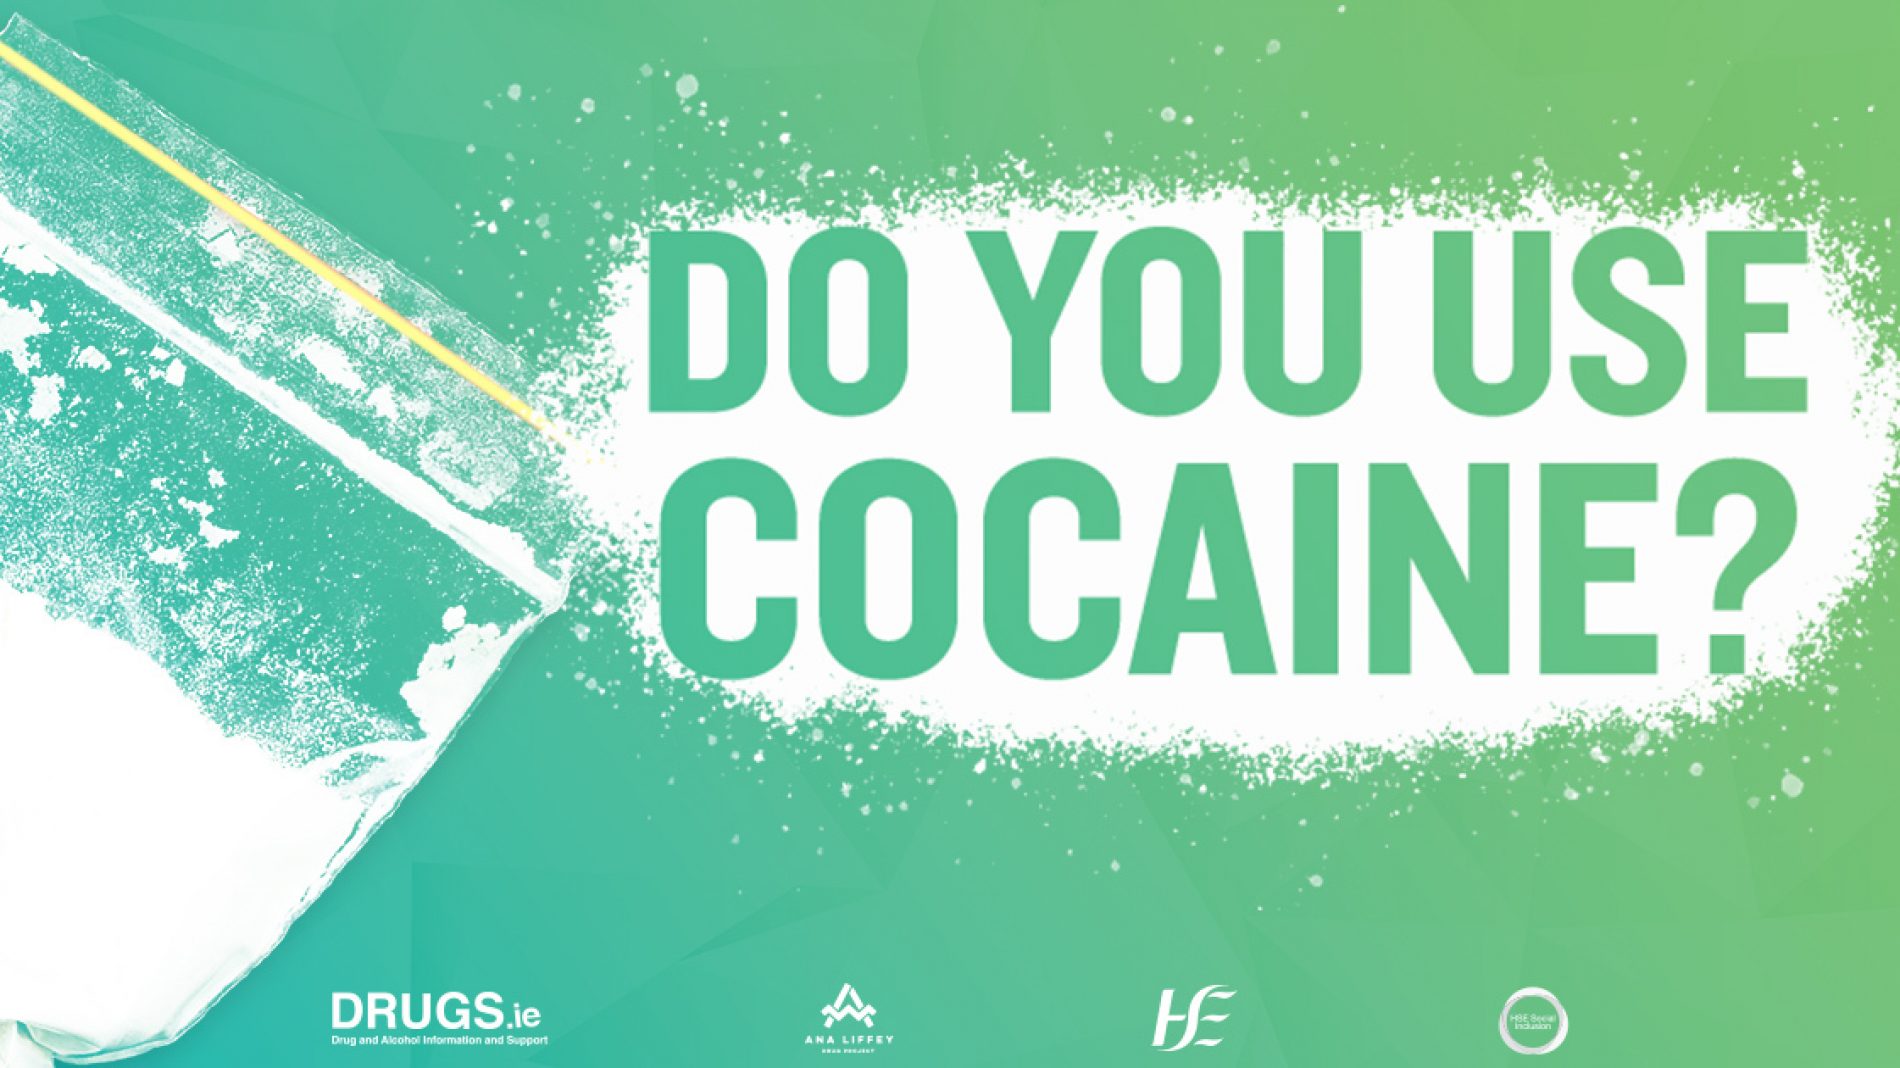 Do you use cocaine campaign poster